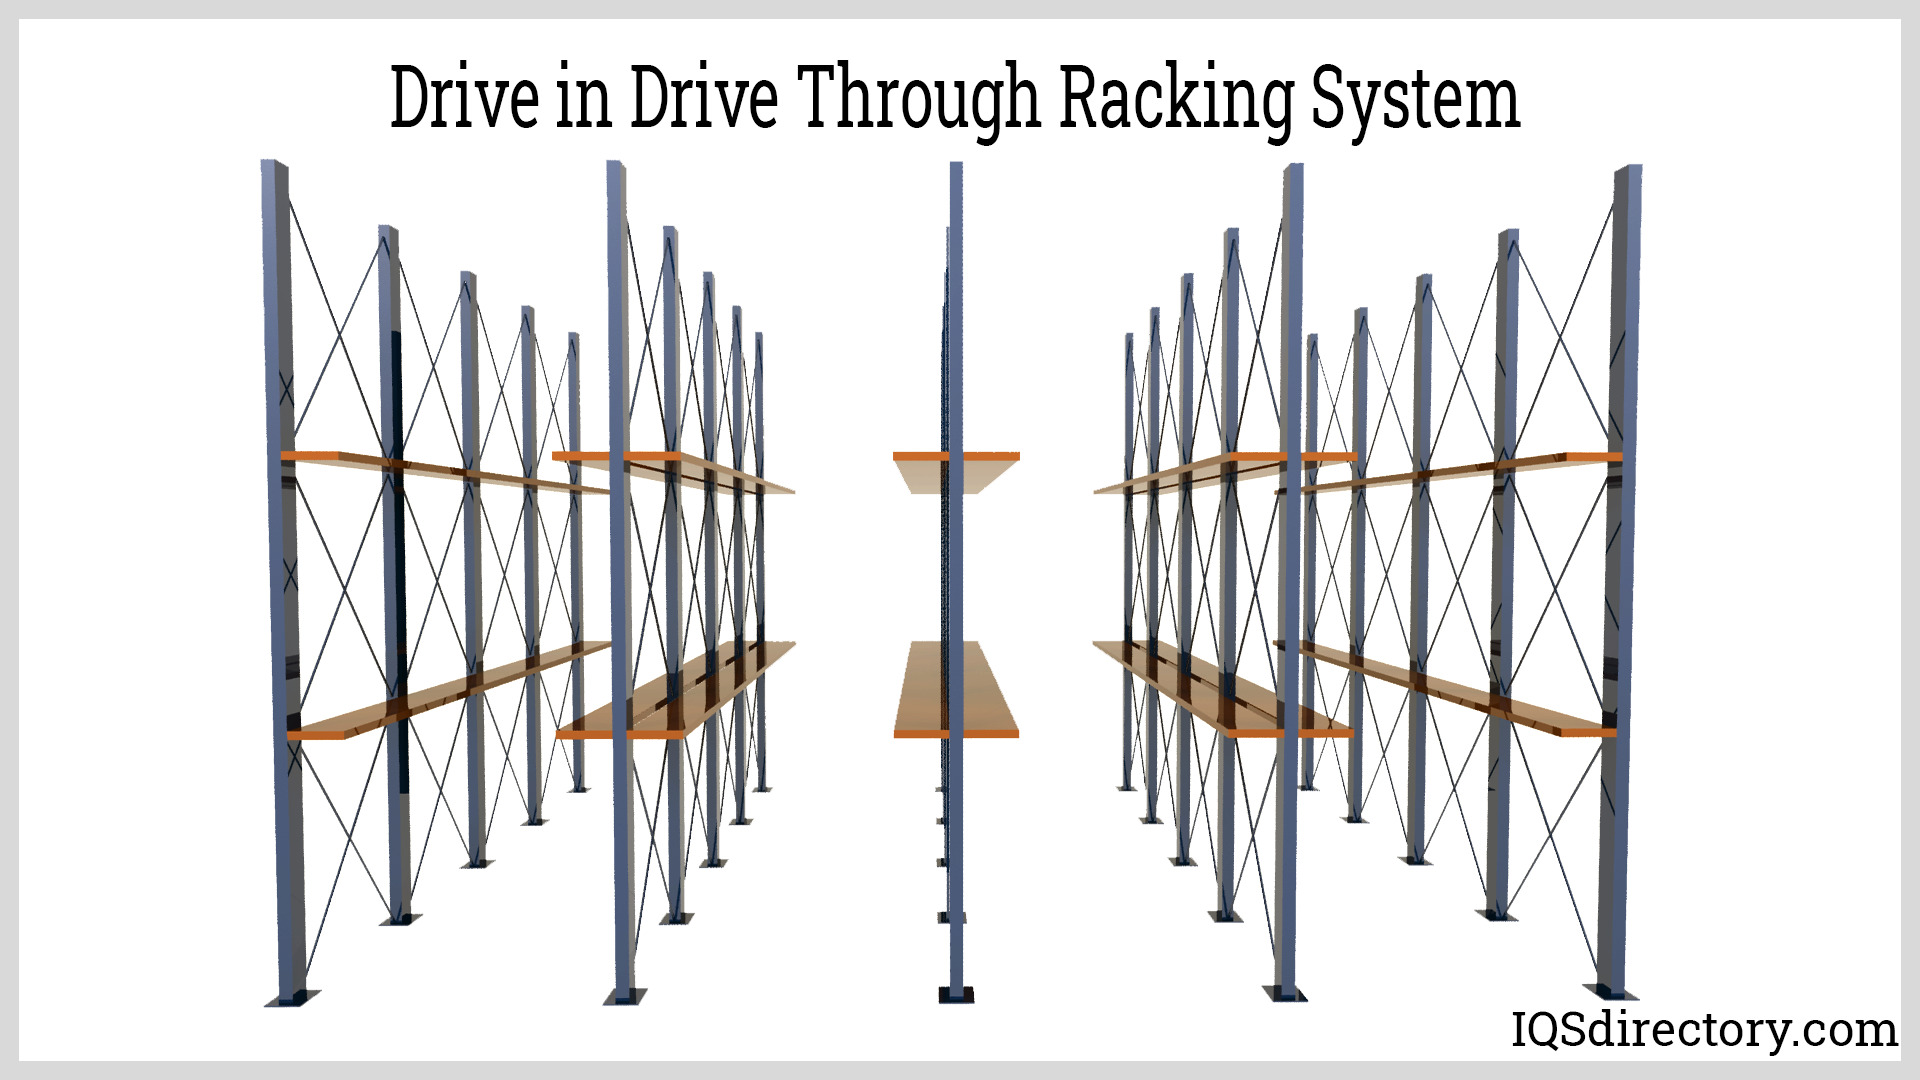 Drive in Drive Through Racking System